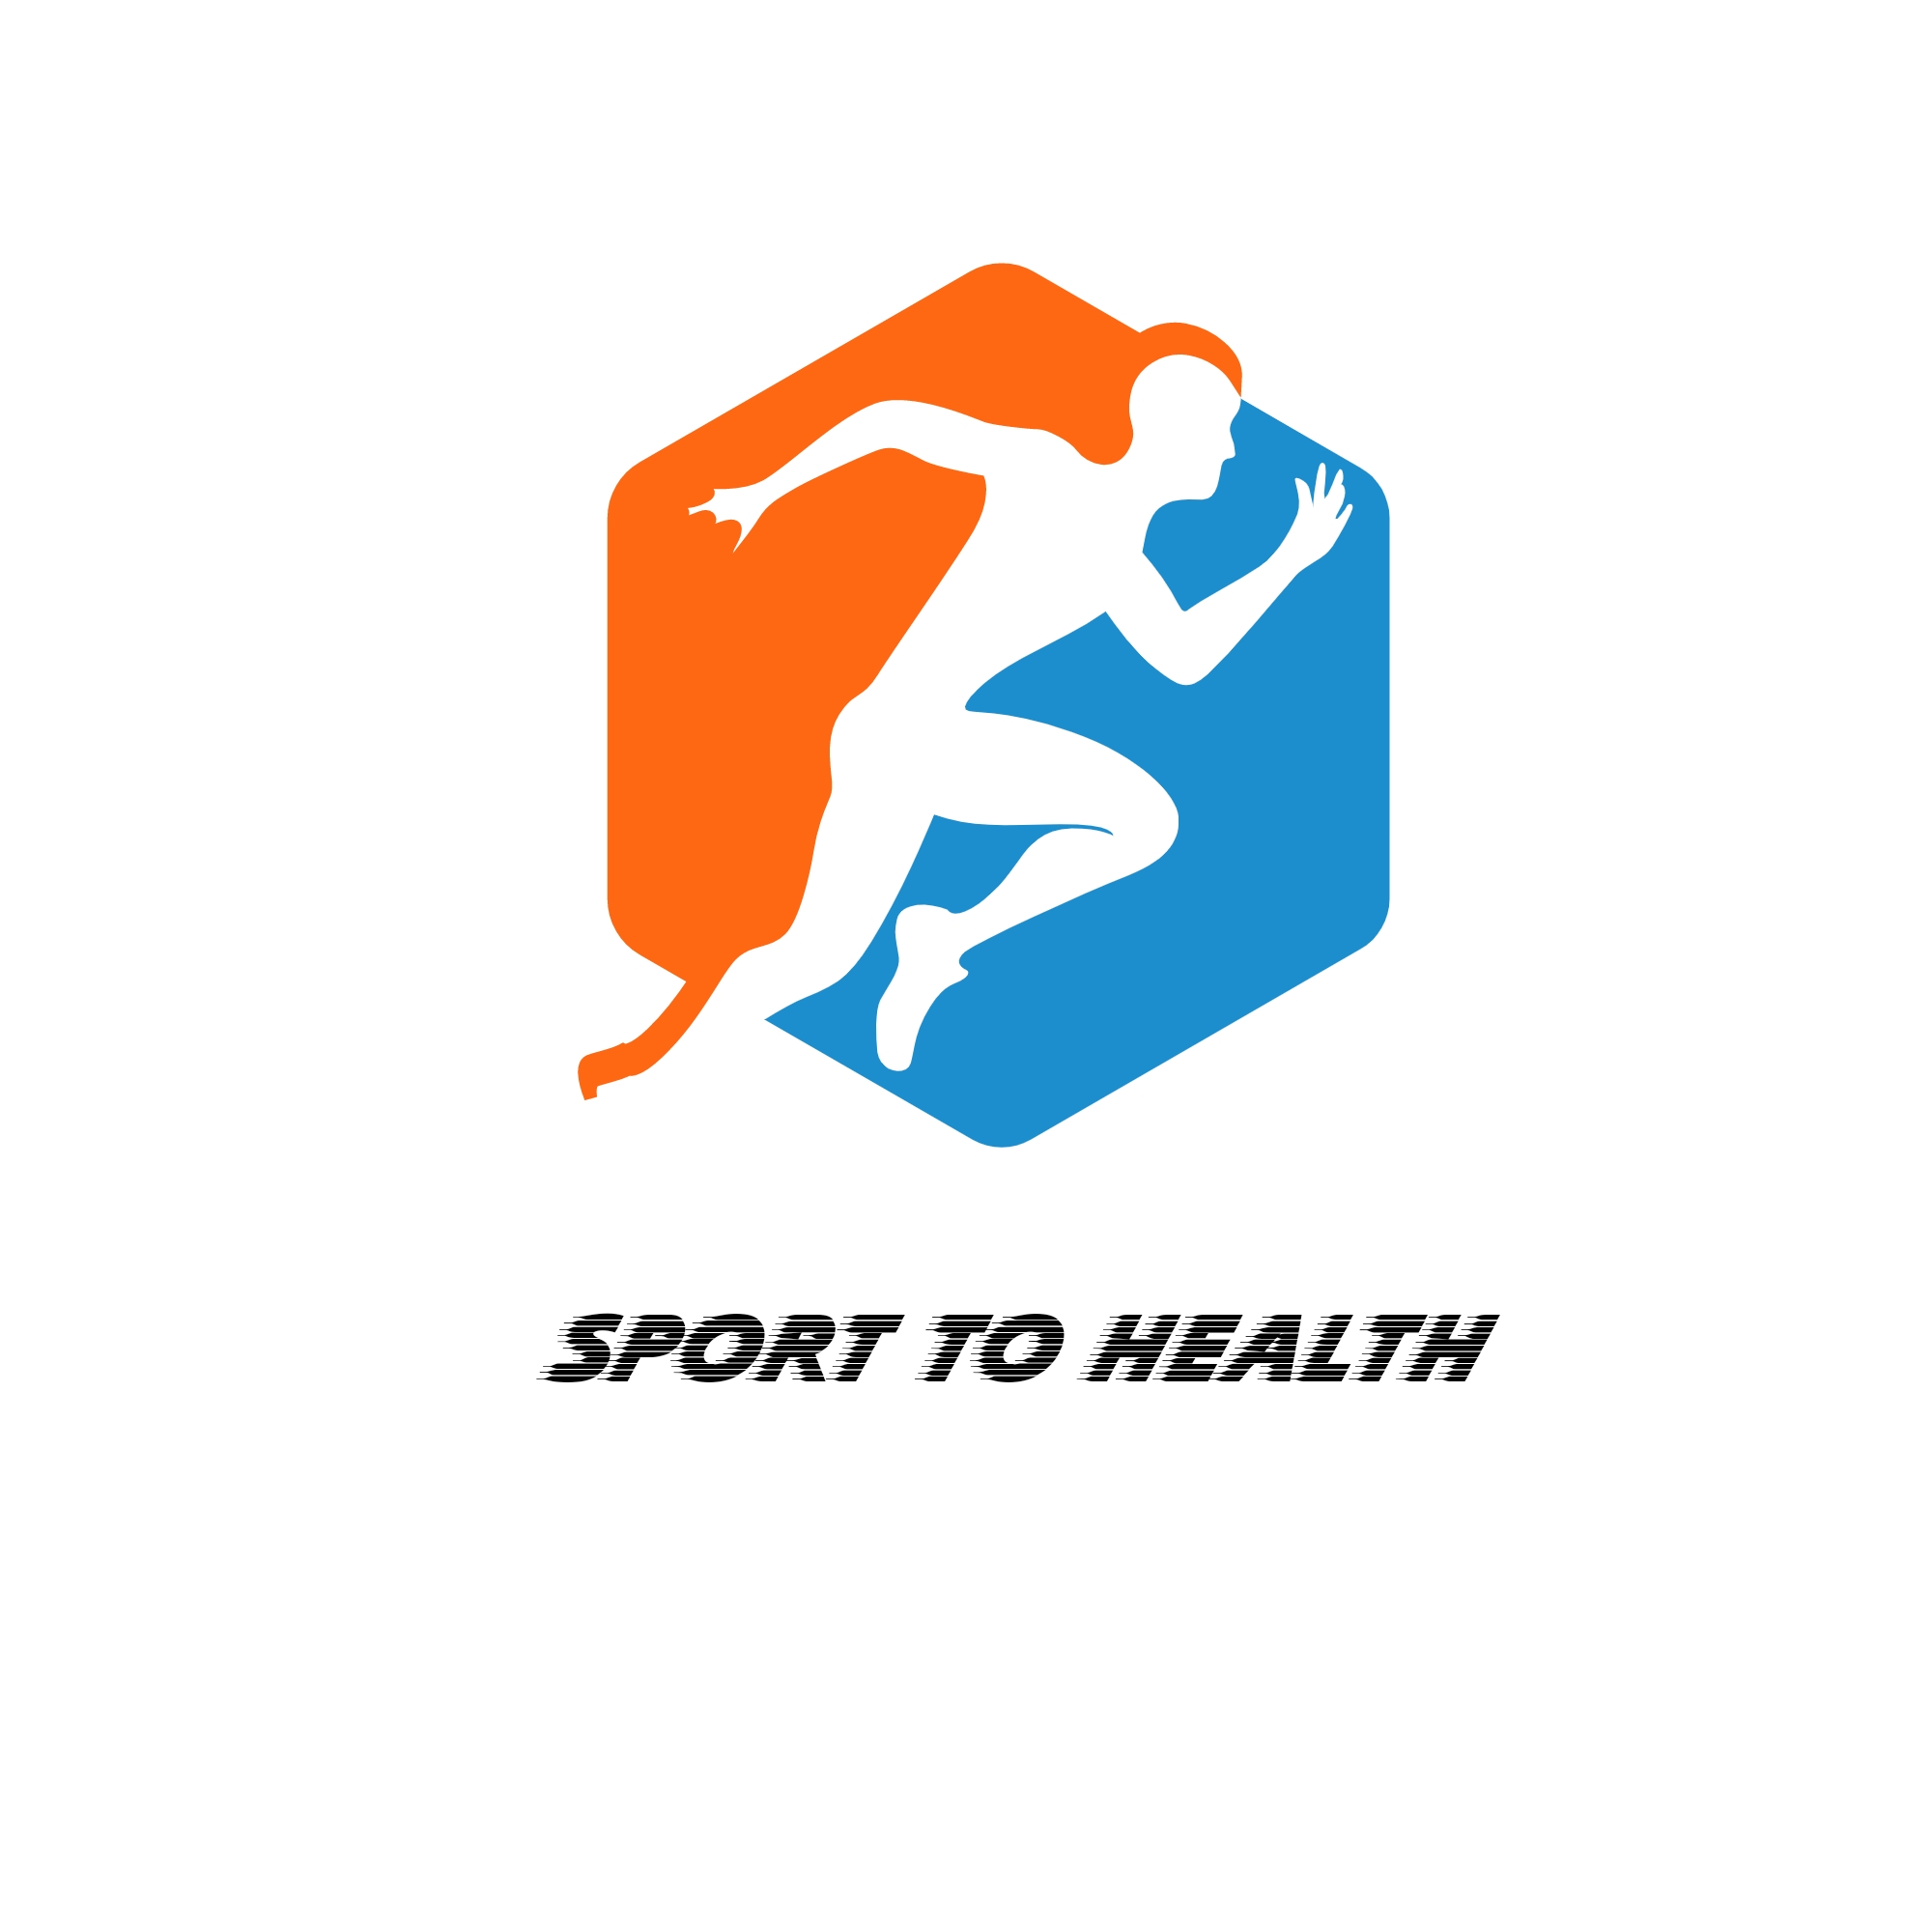 SPORT TO HEALTH ✔